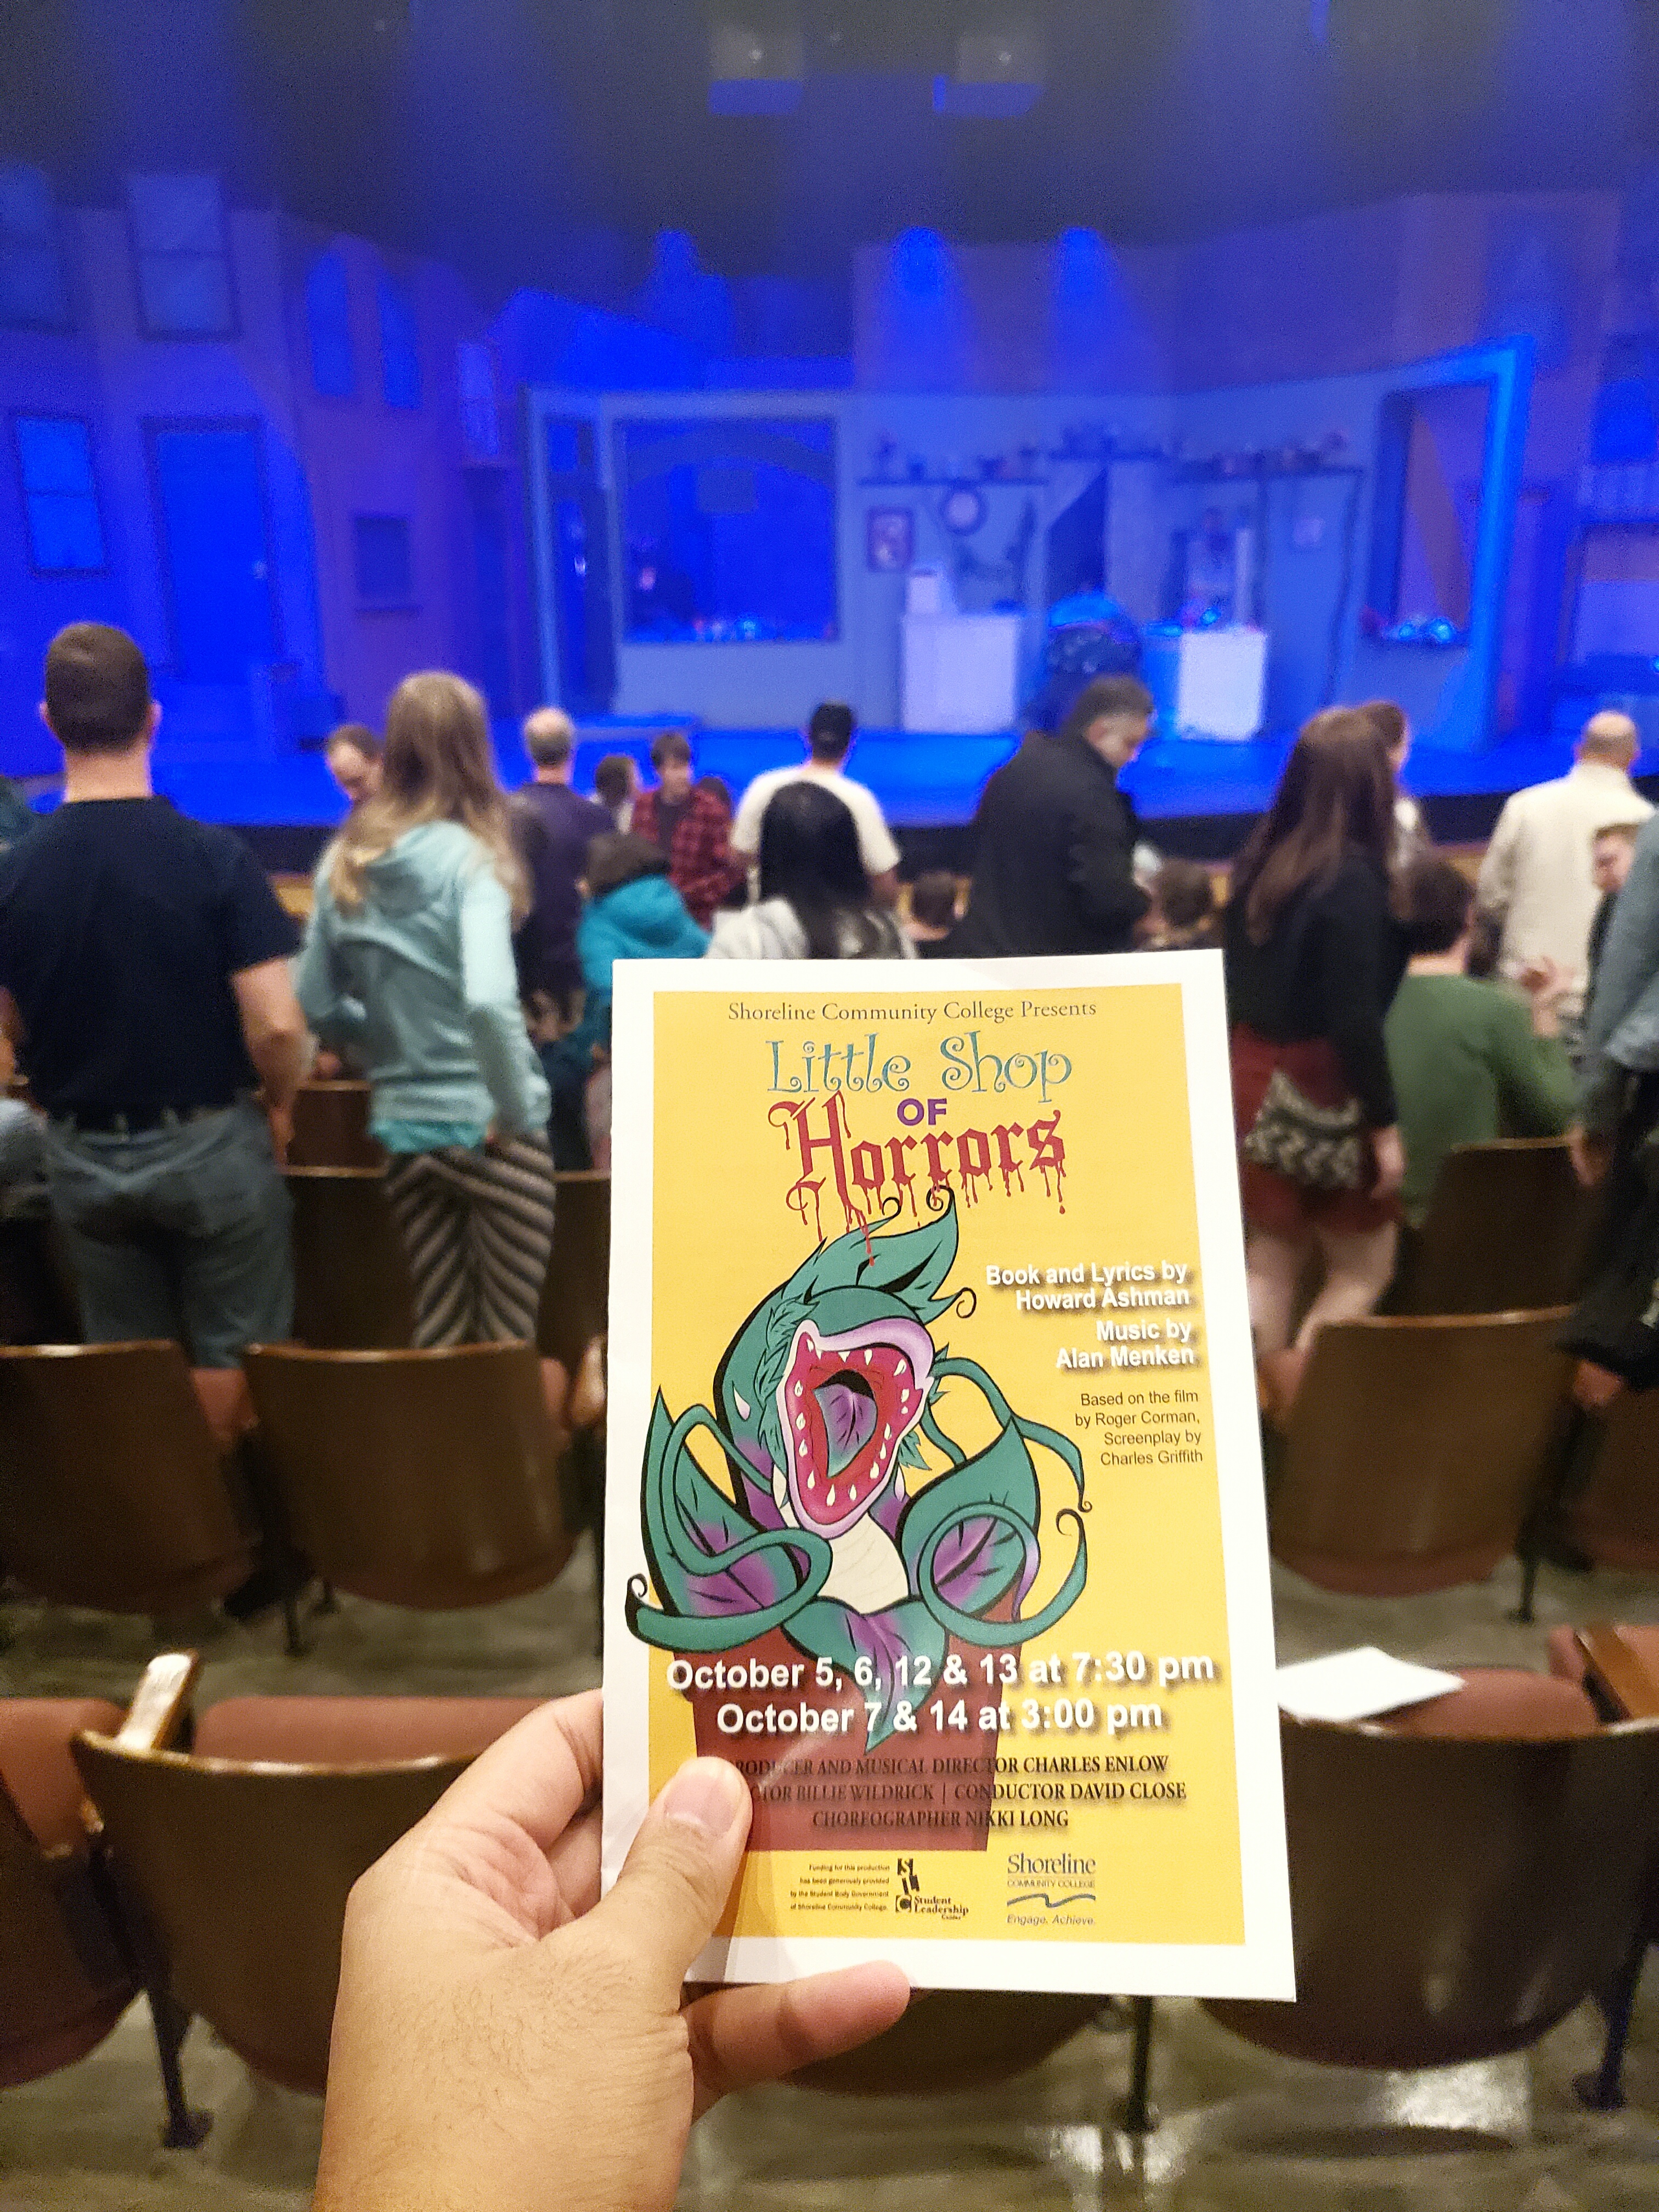 Watched the Little Shop of Horrors musical. The main characters were uniquely portrayed by puppets (like in Avenue Q). Sadly, the urchin ensemble desperately lacked its characteristic soul music quality.